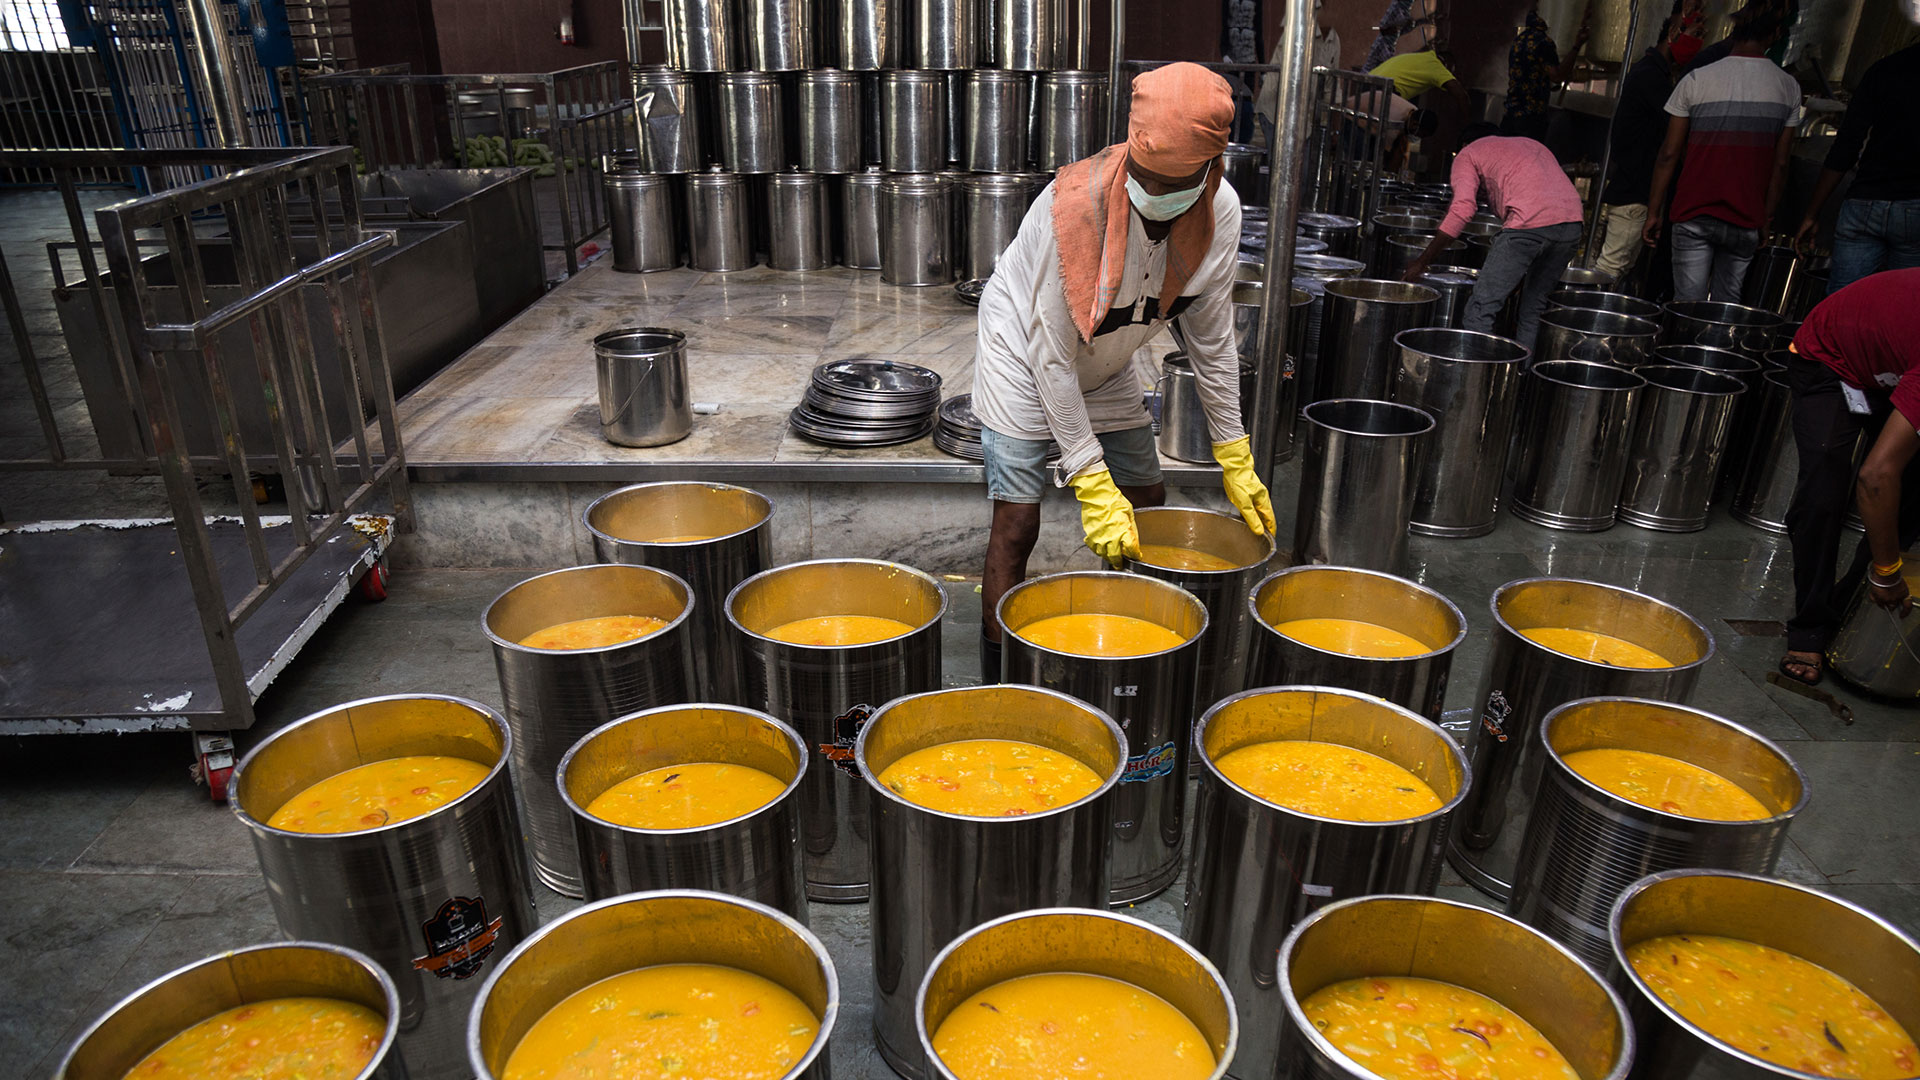 Inside Tata Steel’s #ThoughtforFood kitchen. By June 25, 27.4 lakh+ cooked meals were served across 184 settlements in Jamshedpur